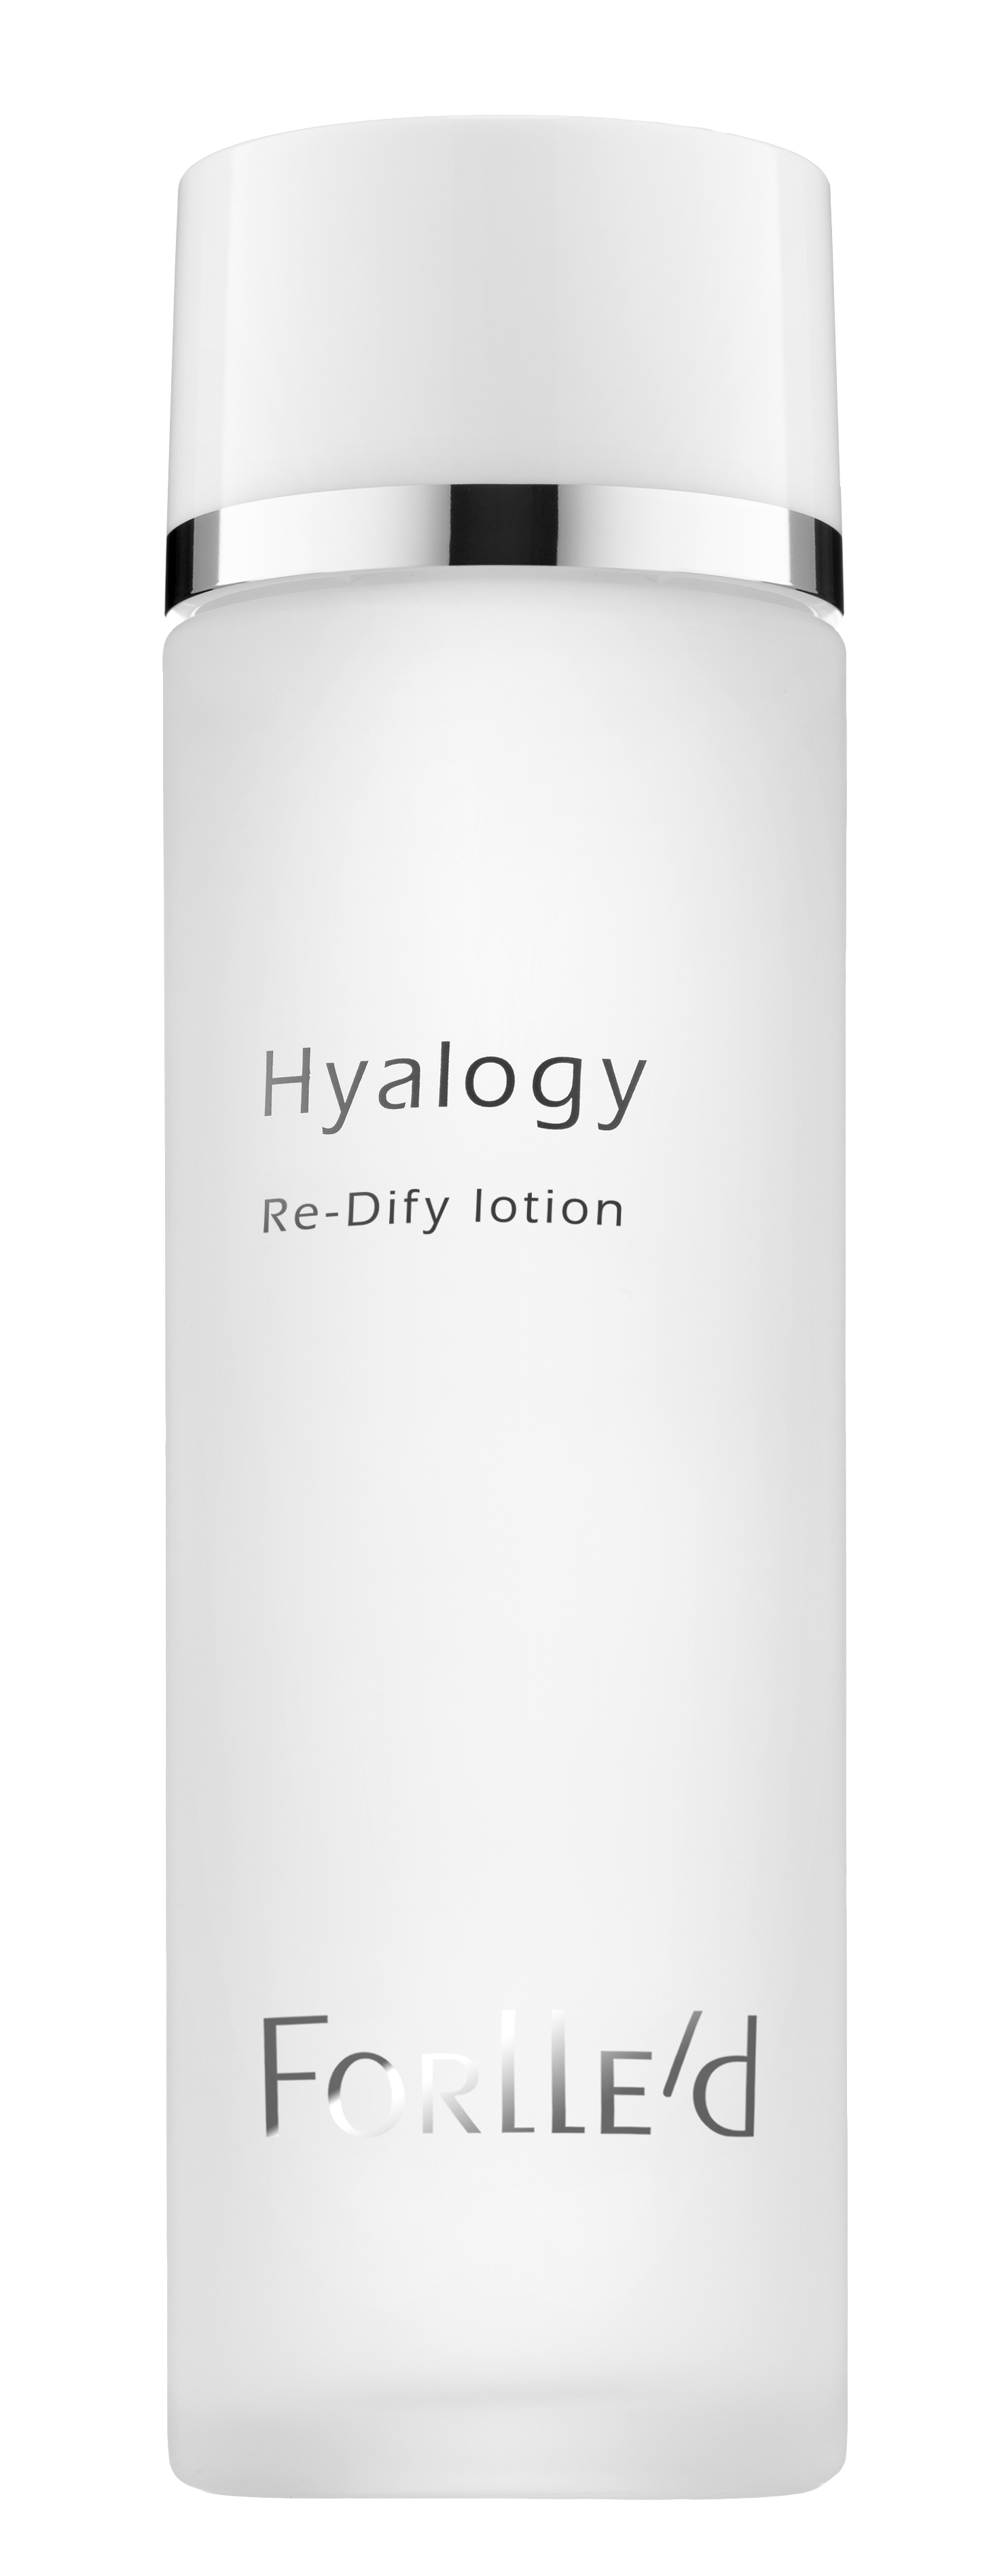 Forlle'd Hyalogy Re-Dify lotion (120ml)